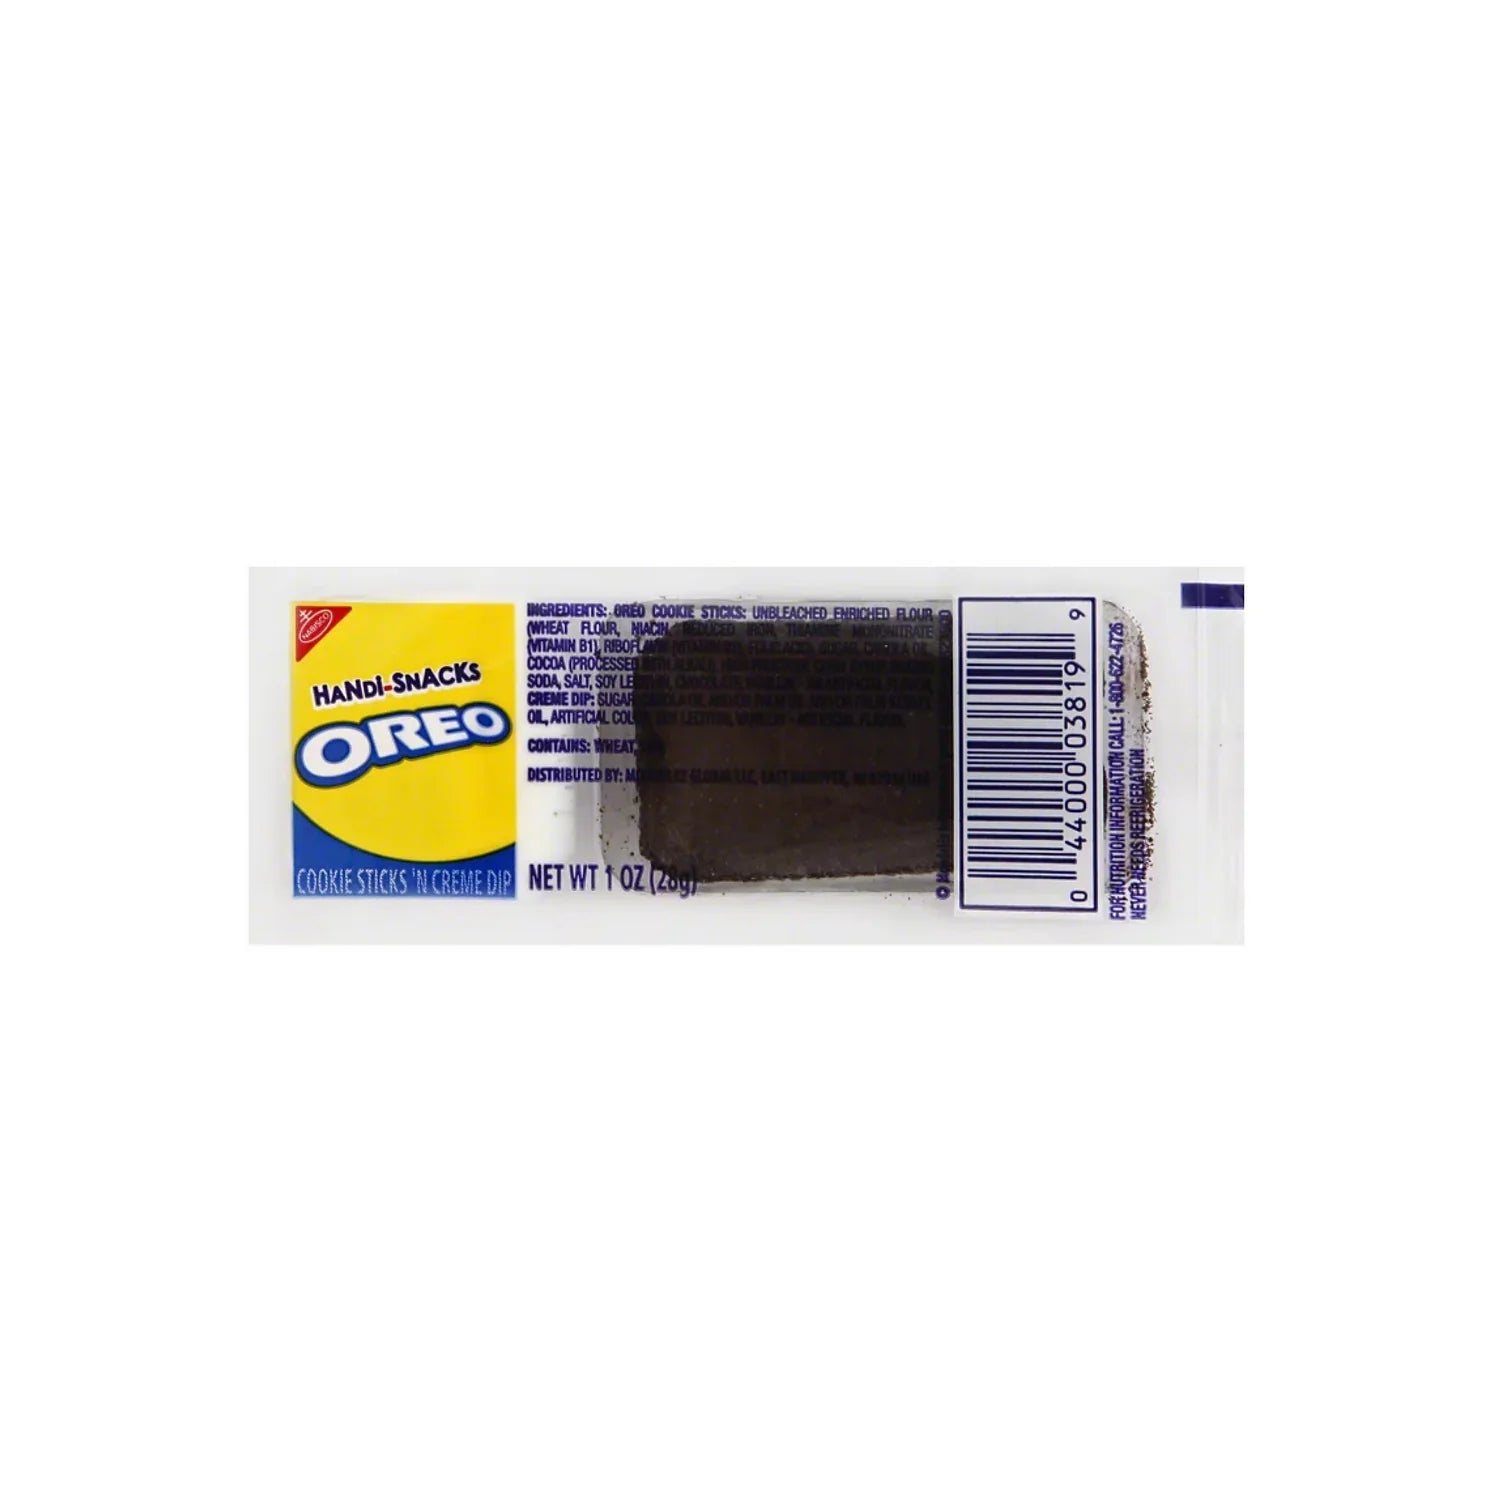 Oreo - Oreo Biscuits and Cream - 28g (Single Pack)